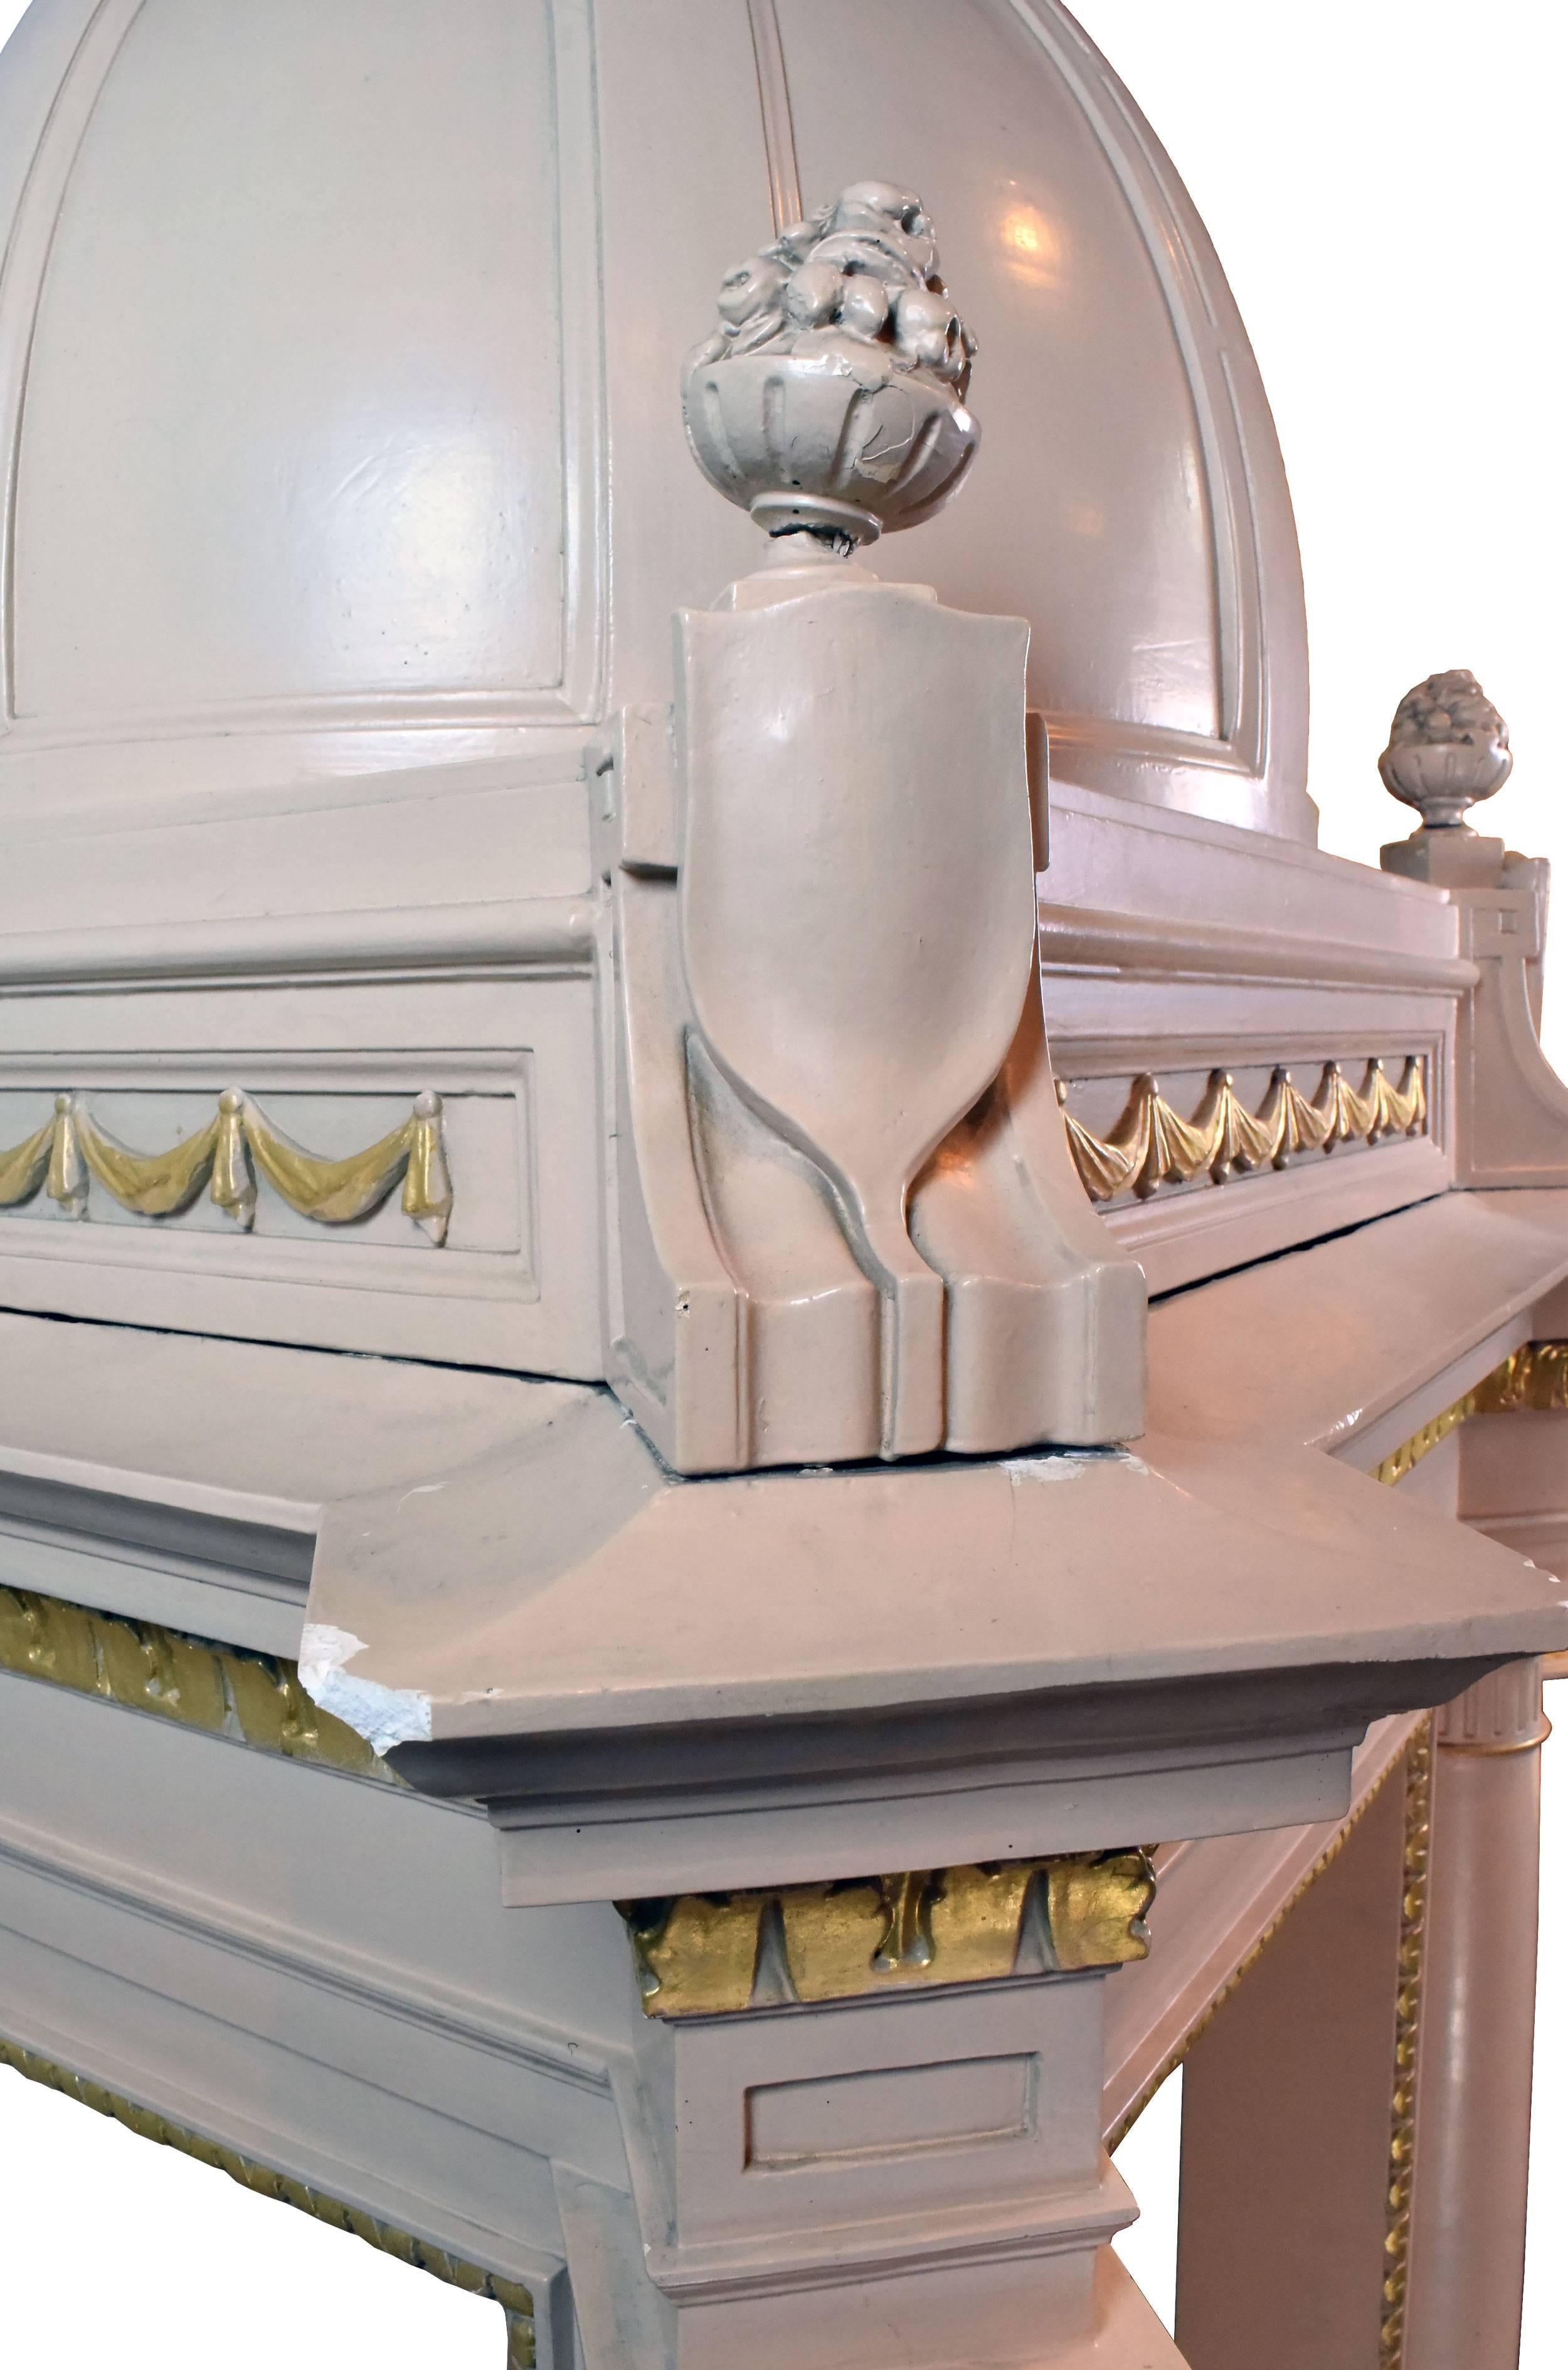 Made entirely of plaster and painted a soft peach color with dazzling gold accents, this baldachino is a sight to behold! Originally used as a freestanding altar canopy in Minneapolis' oldest church, this fixture follows a Classic form. The domed